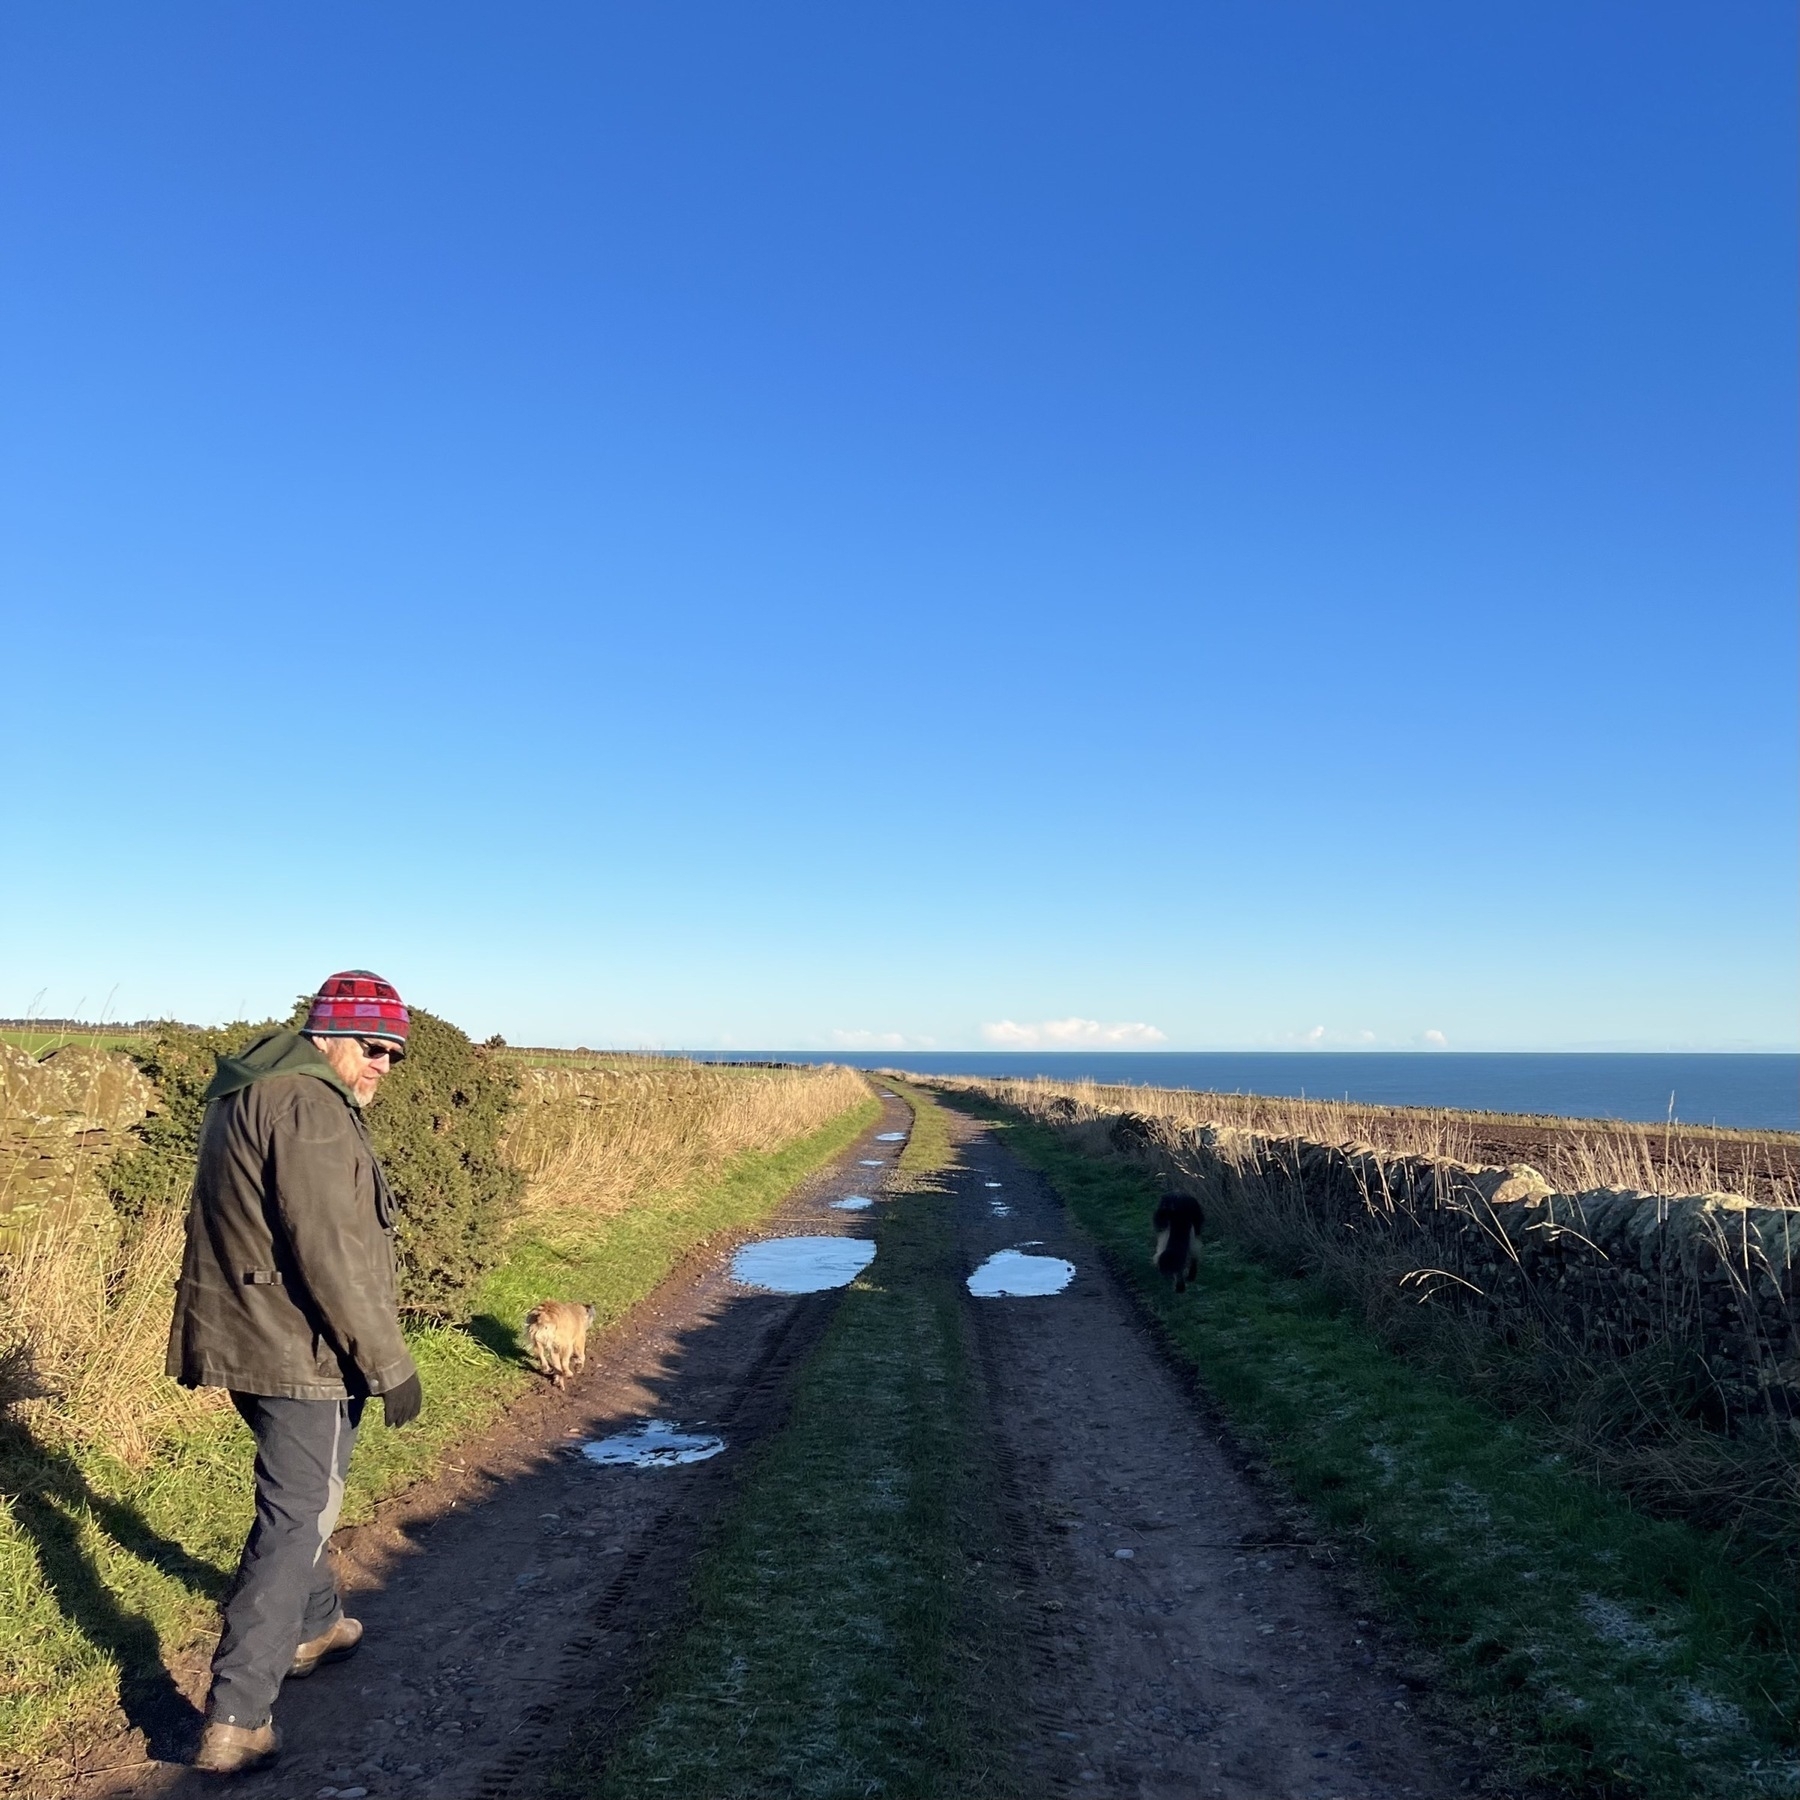 Walking the dogs on a track to Ethie, with the North Sea in the background